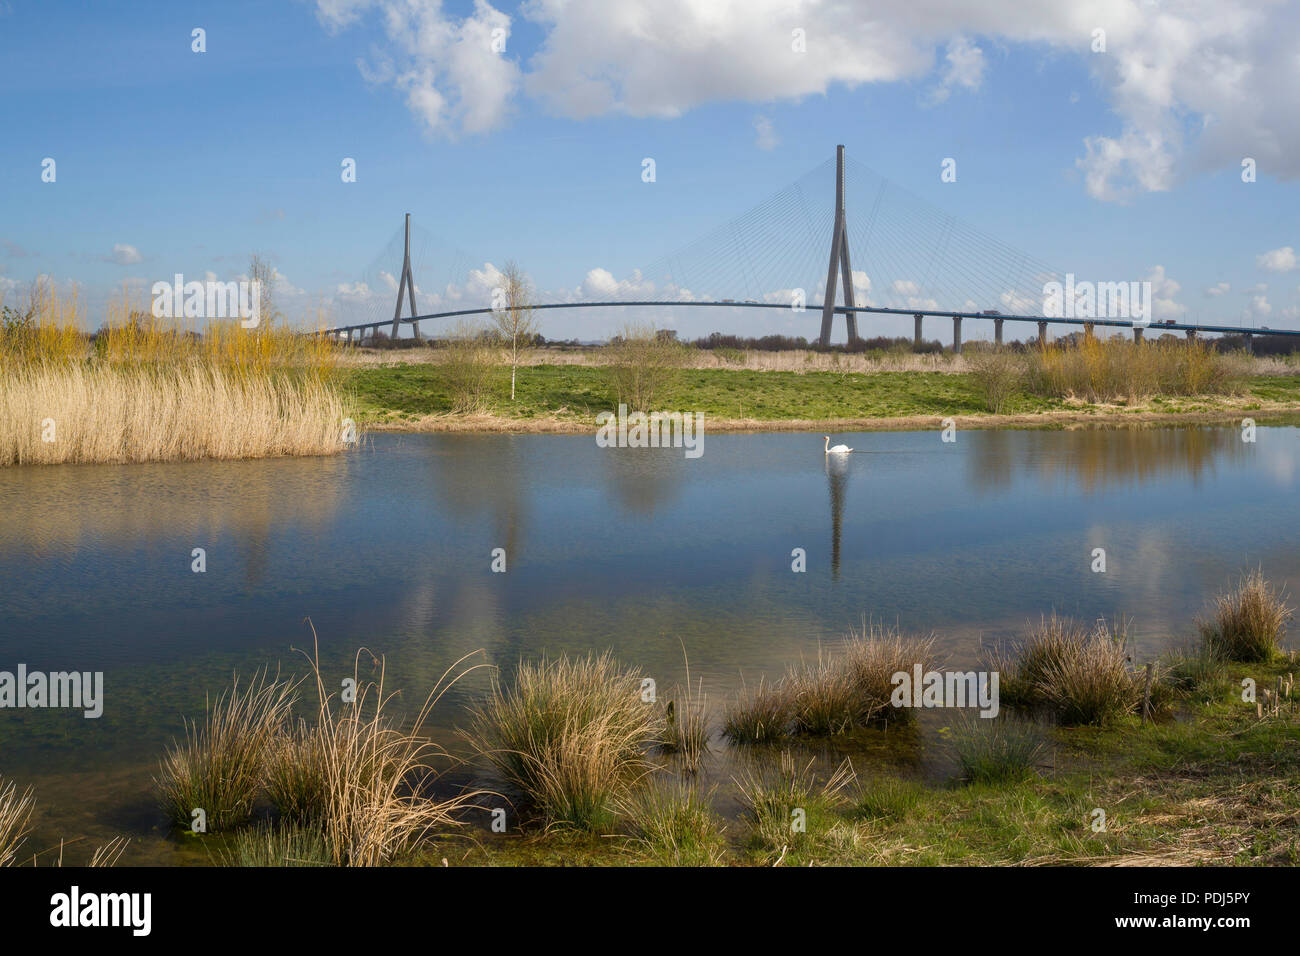 The Pont de Normandie cable stayed bridge over the River Seine at Honfleur, Normandy, France viewed over wetlands with a swan in the foreground Stock Photo